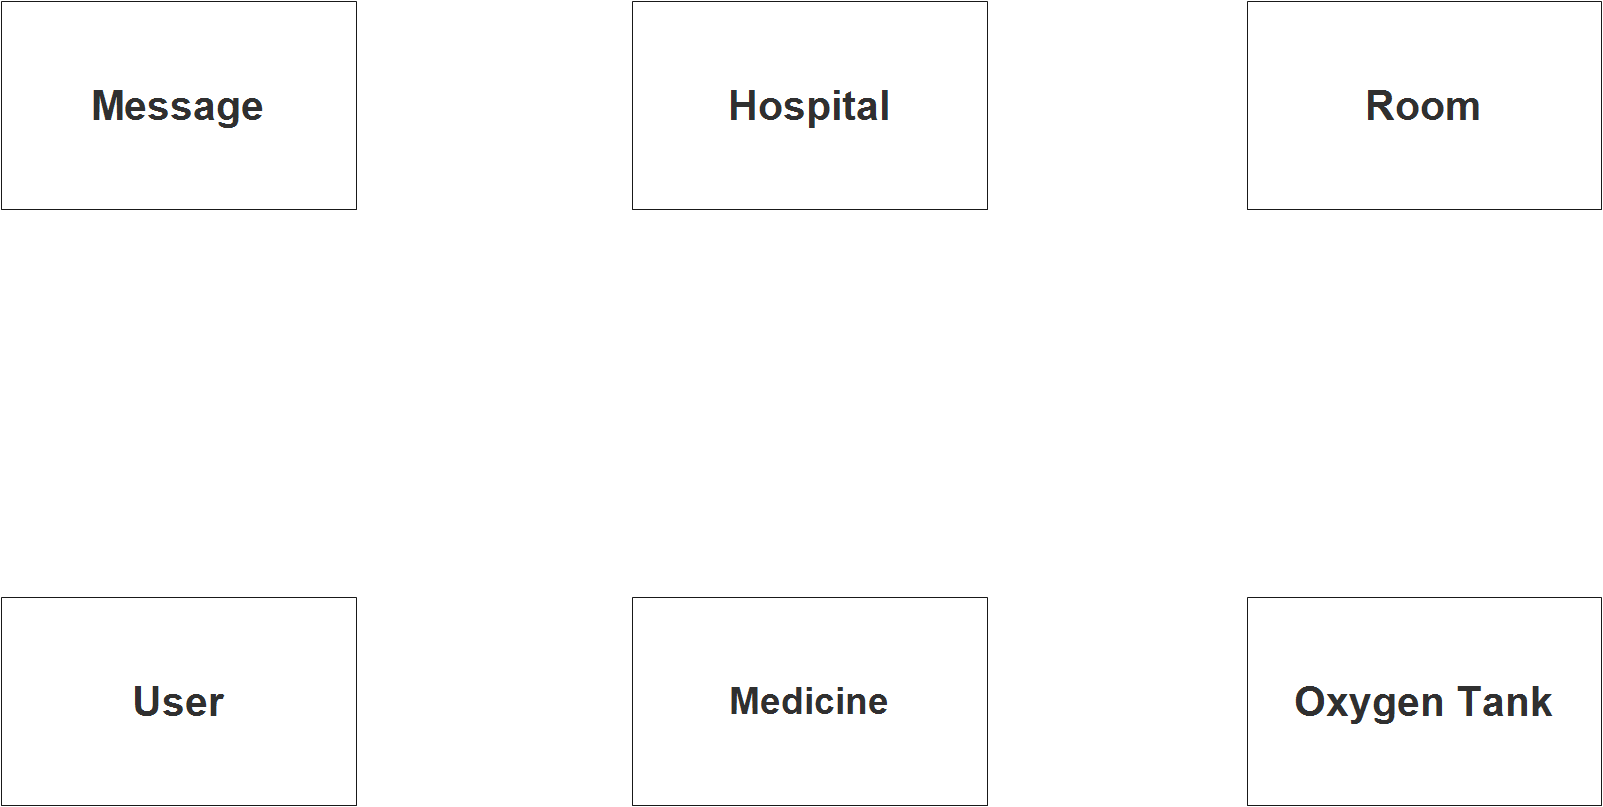 Hospital Resources and Room Utilization ER Diagram - Step 1 Identify Entities